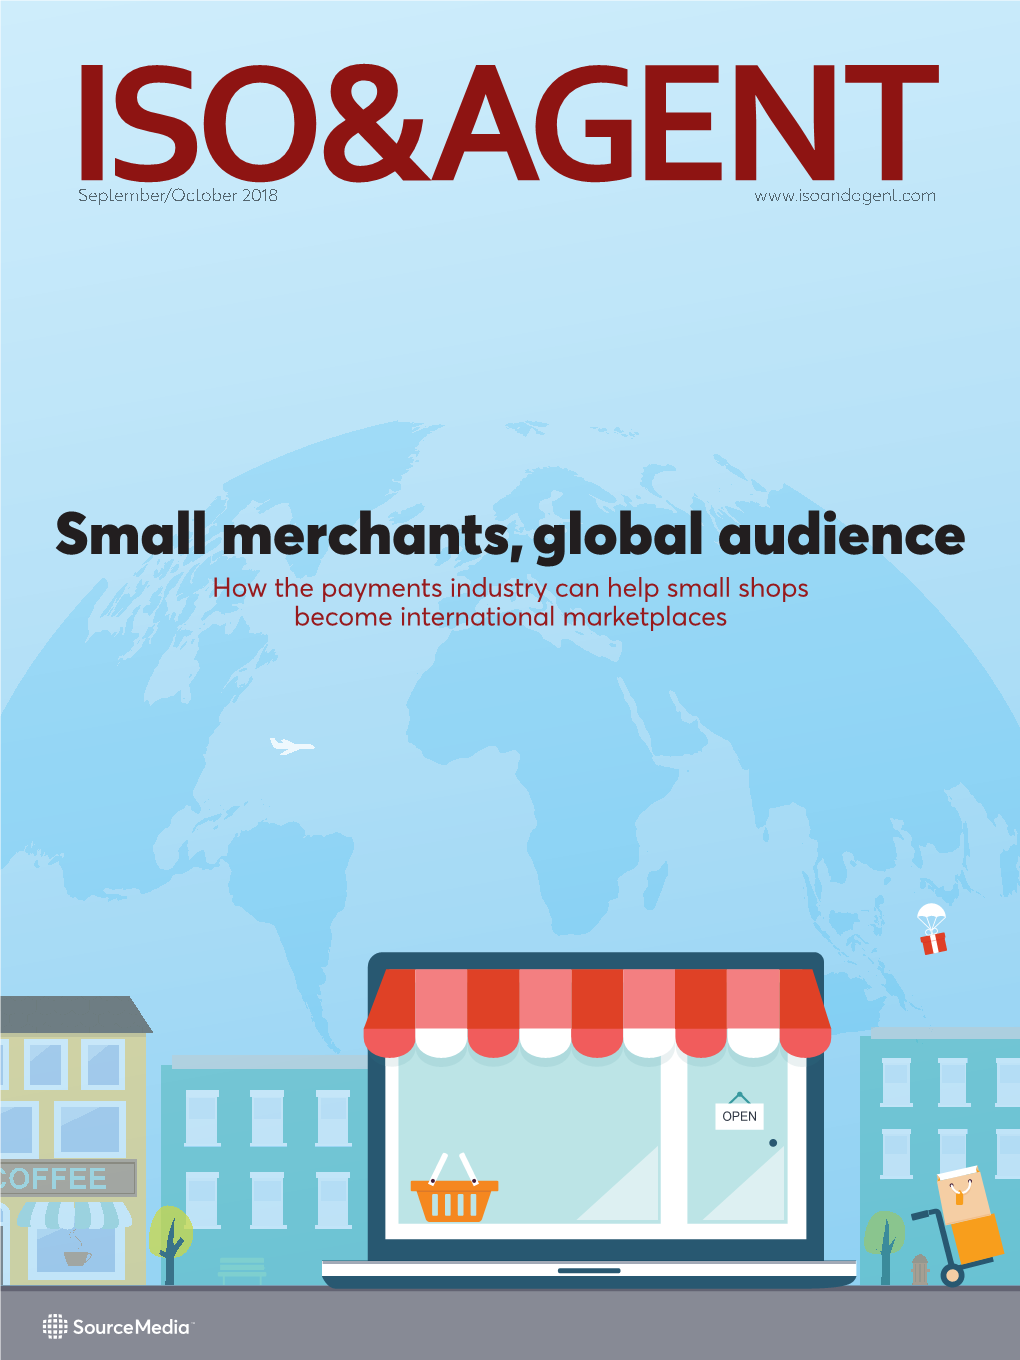 Small Merchants, Global Audience How the Payments Industry Can Help Small Shops Become International Marketplaces